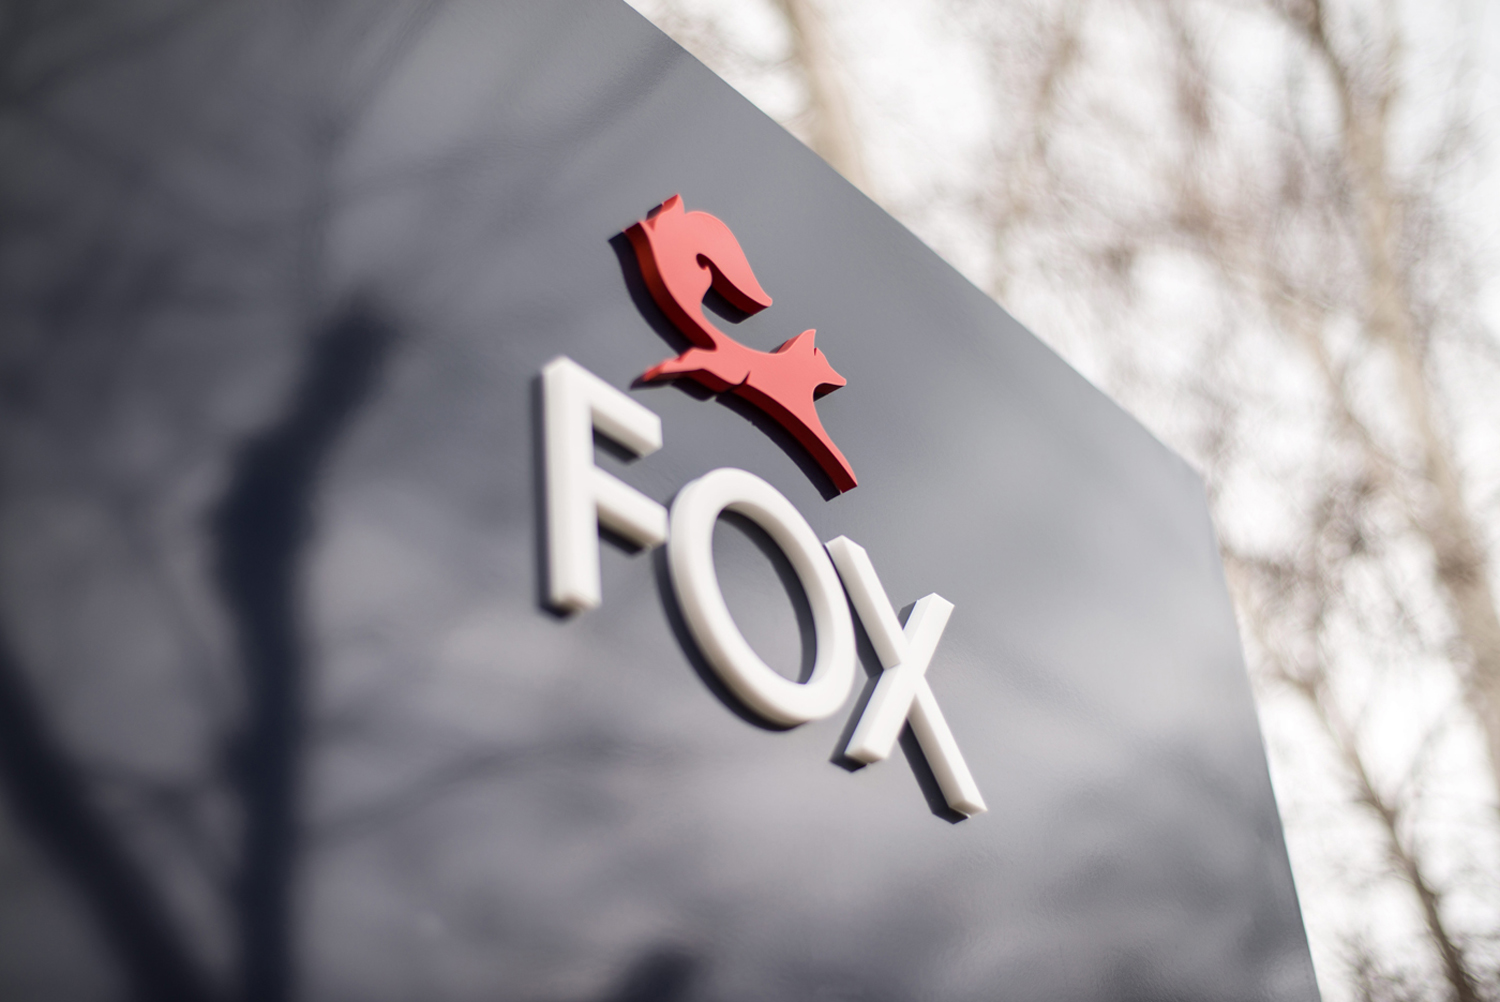 Brand identity and signage for Fox Real Estate by Parallax Design, Australia